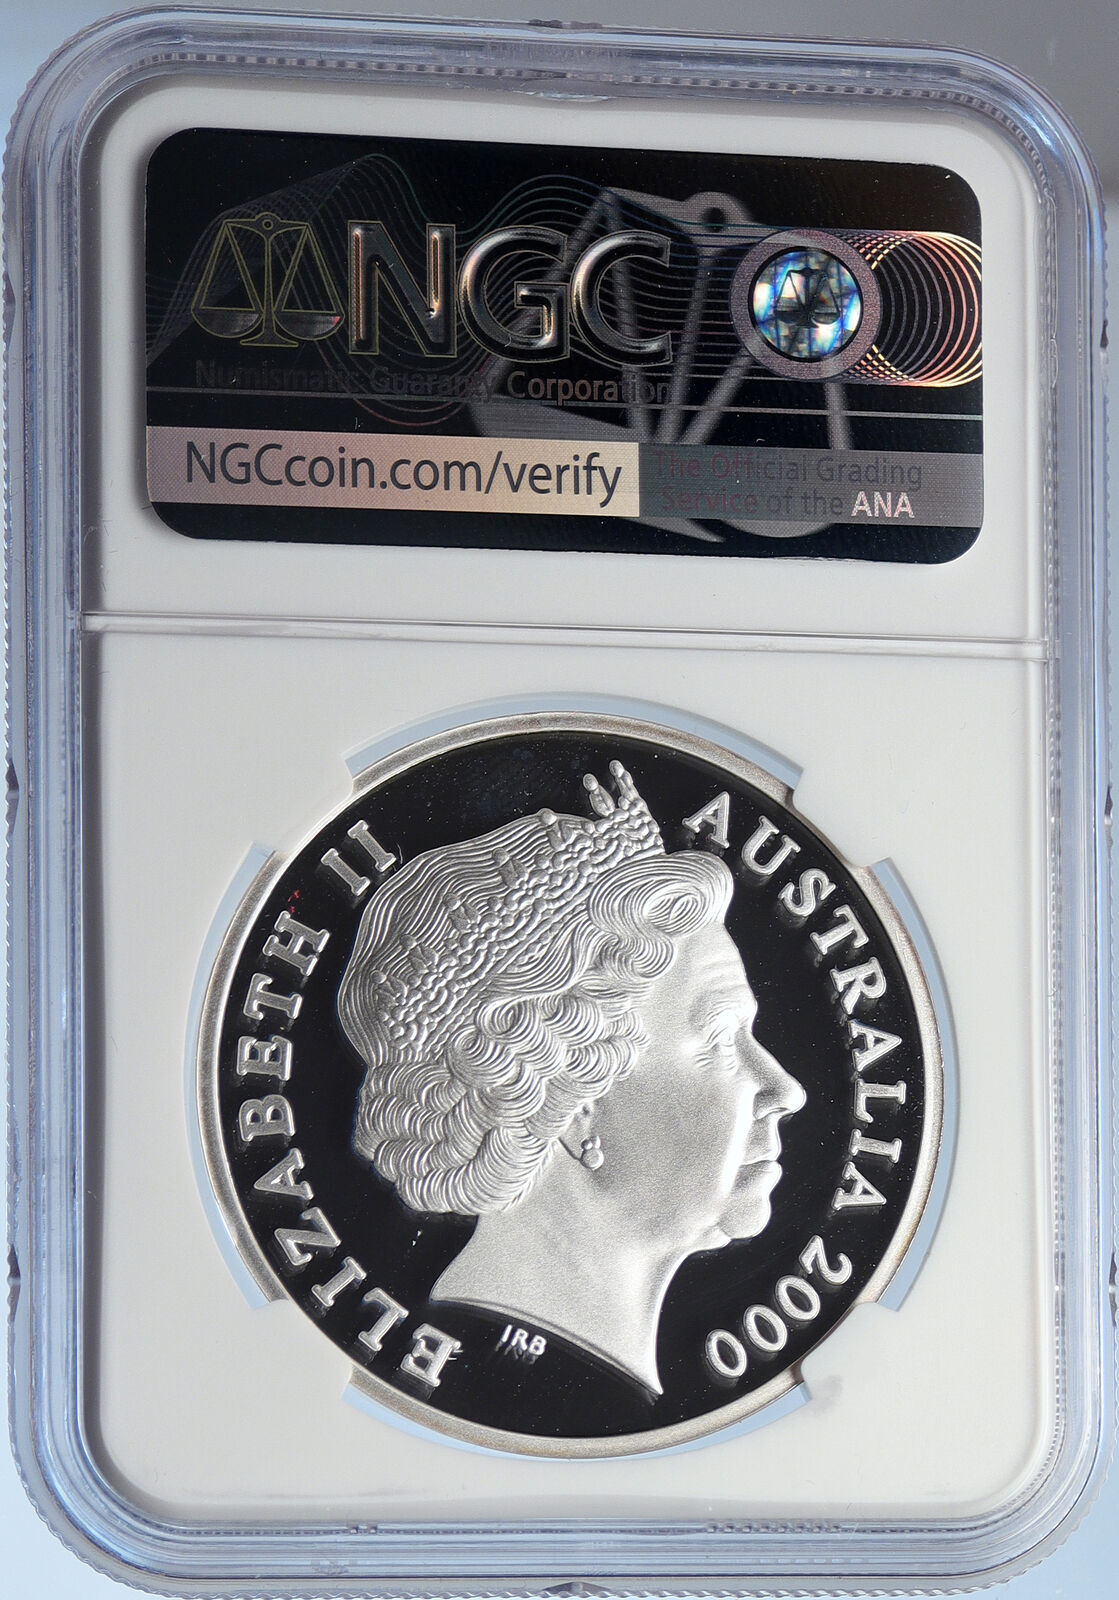 2000 AUSTRALIA Paralympics Olympic Games Proof Silver 5 Dollar Coin NGC i105850